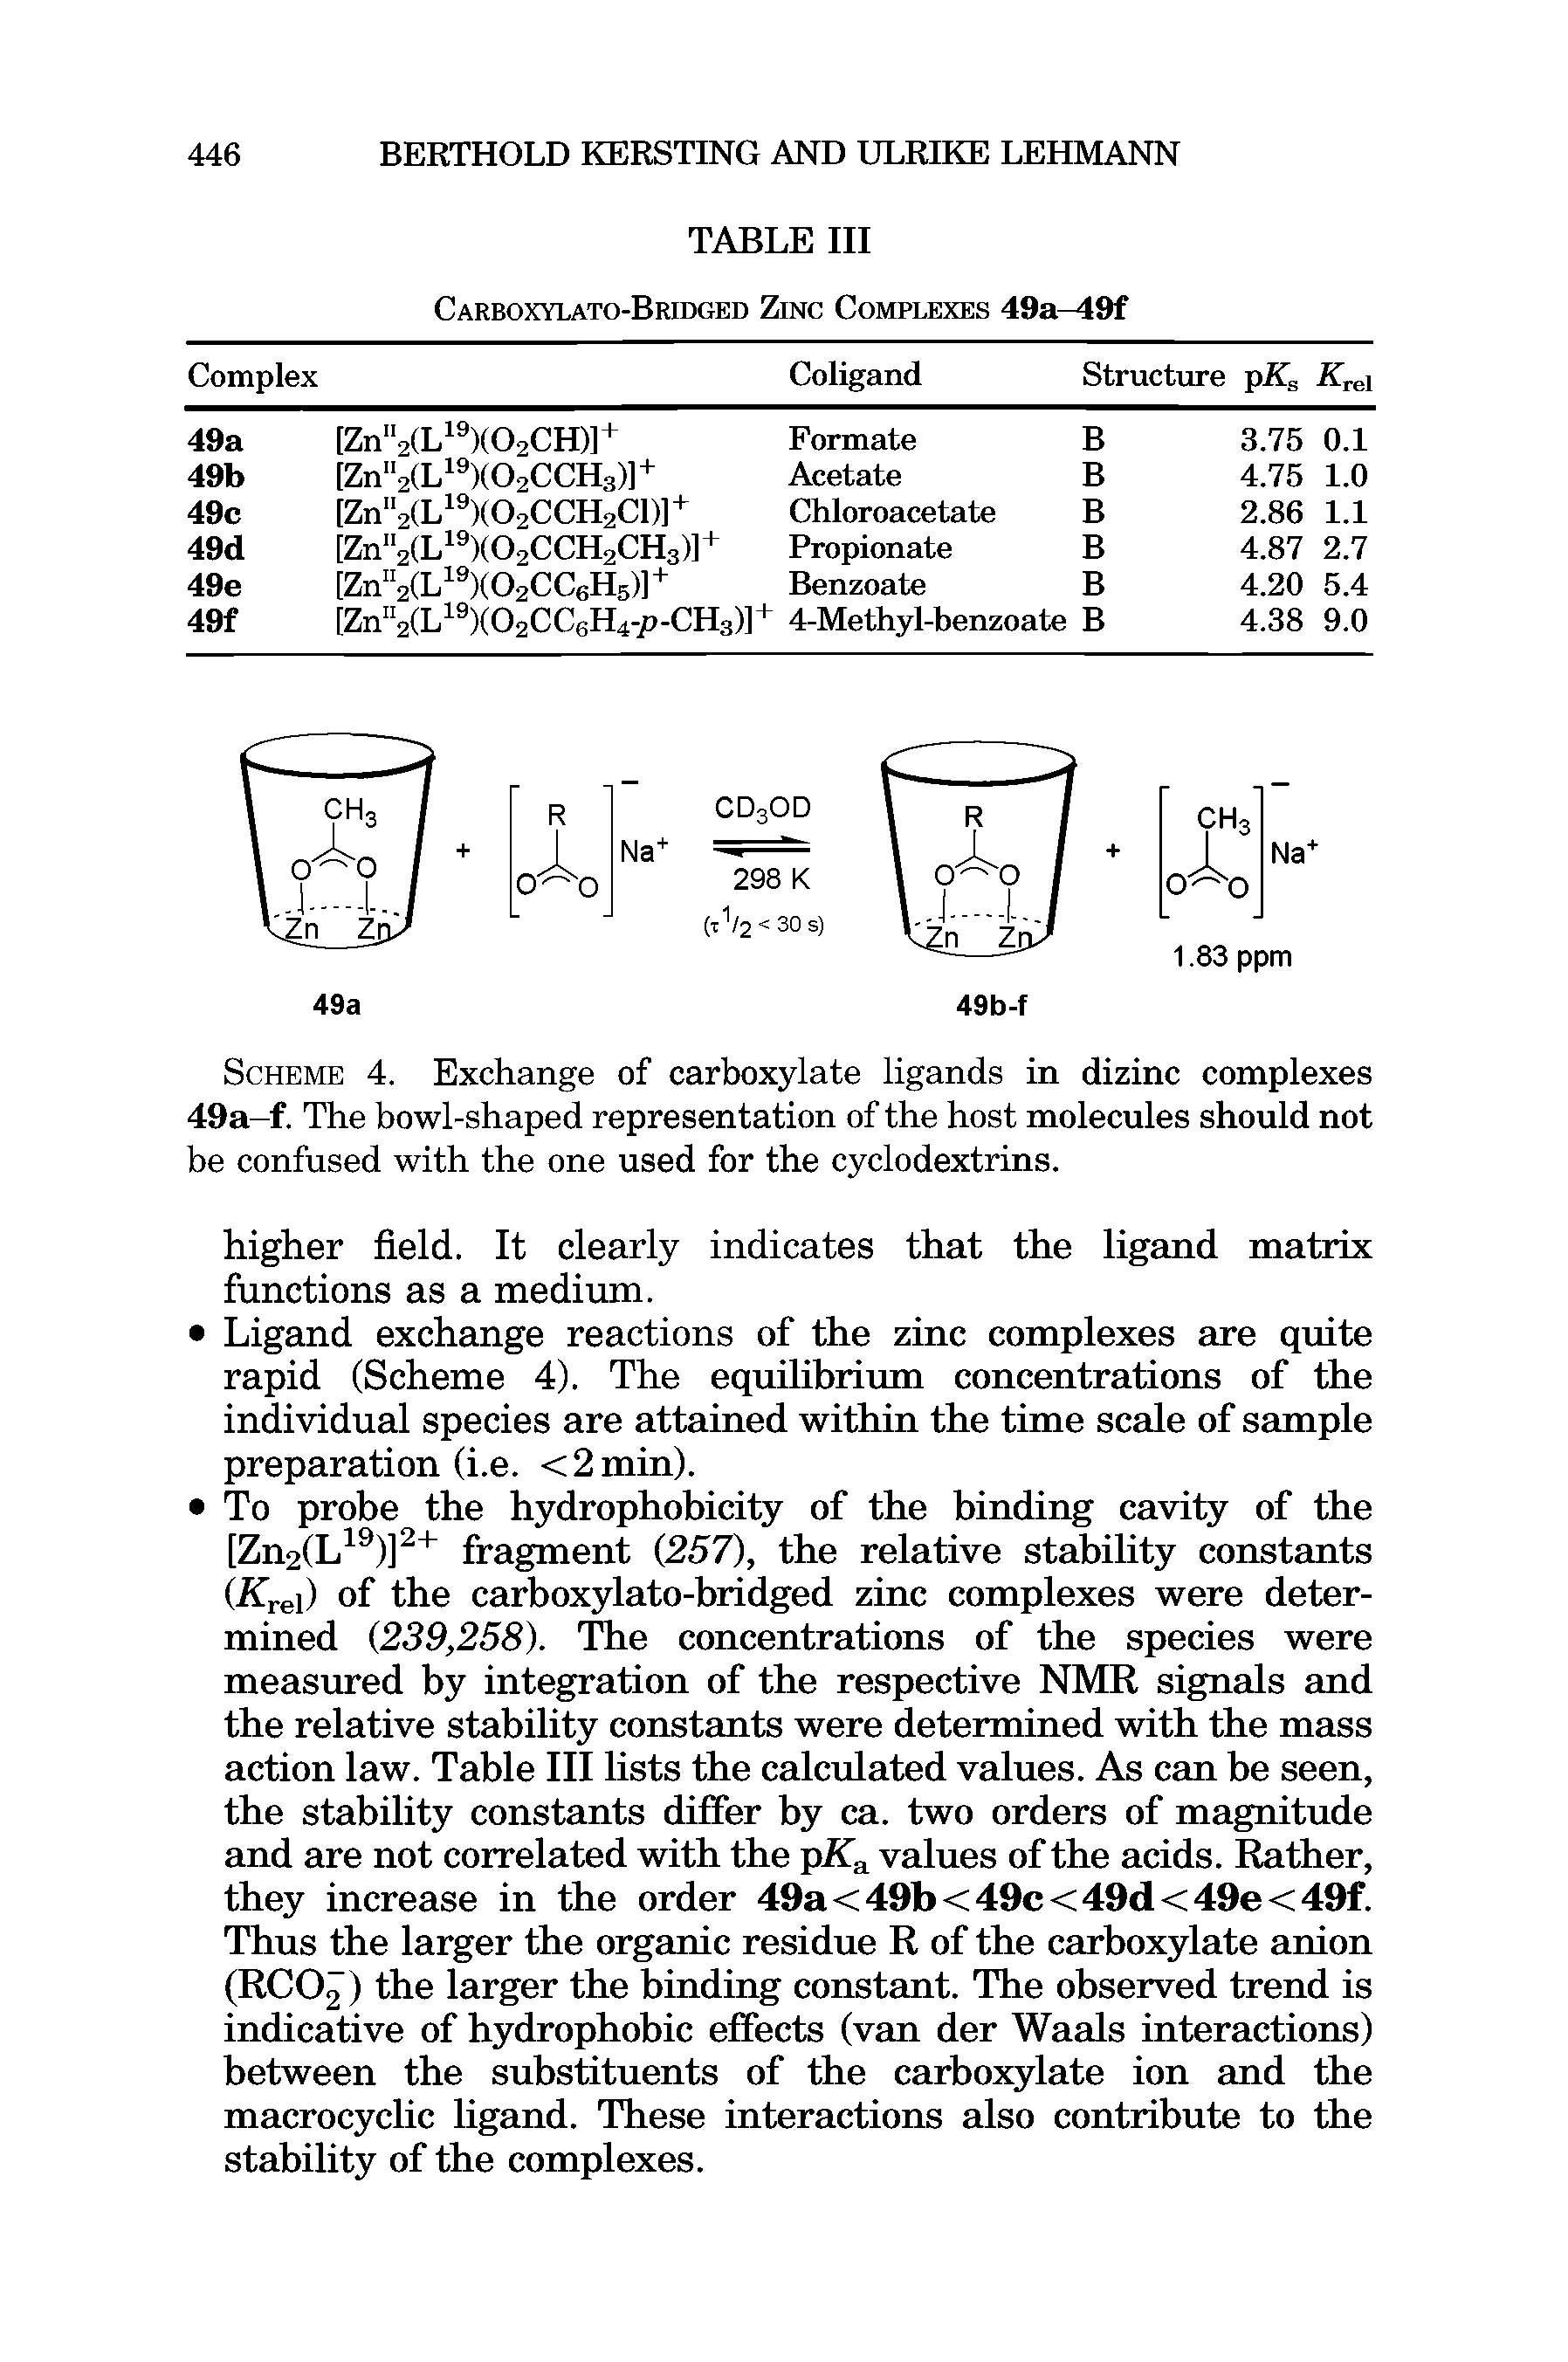 Scheme 4. Exchange of carboxylate ligands in dizinc complexes 49a-f. The bowl-shaped representation of the host molecules should not be confused with the one used for the cyclodextrins.